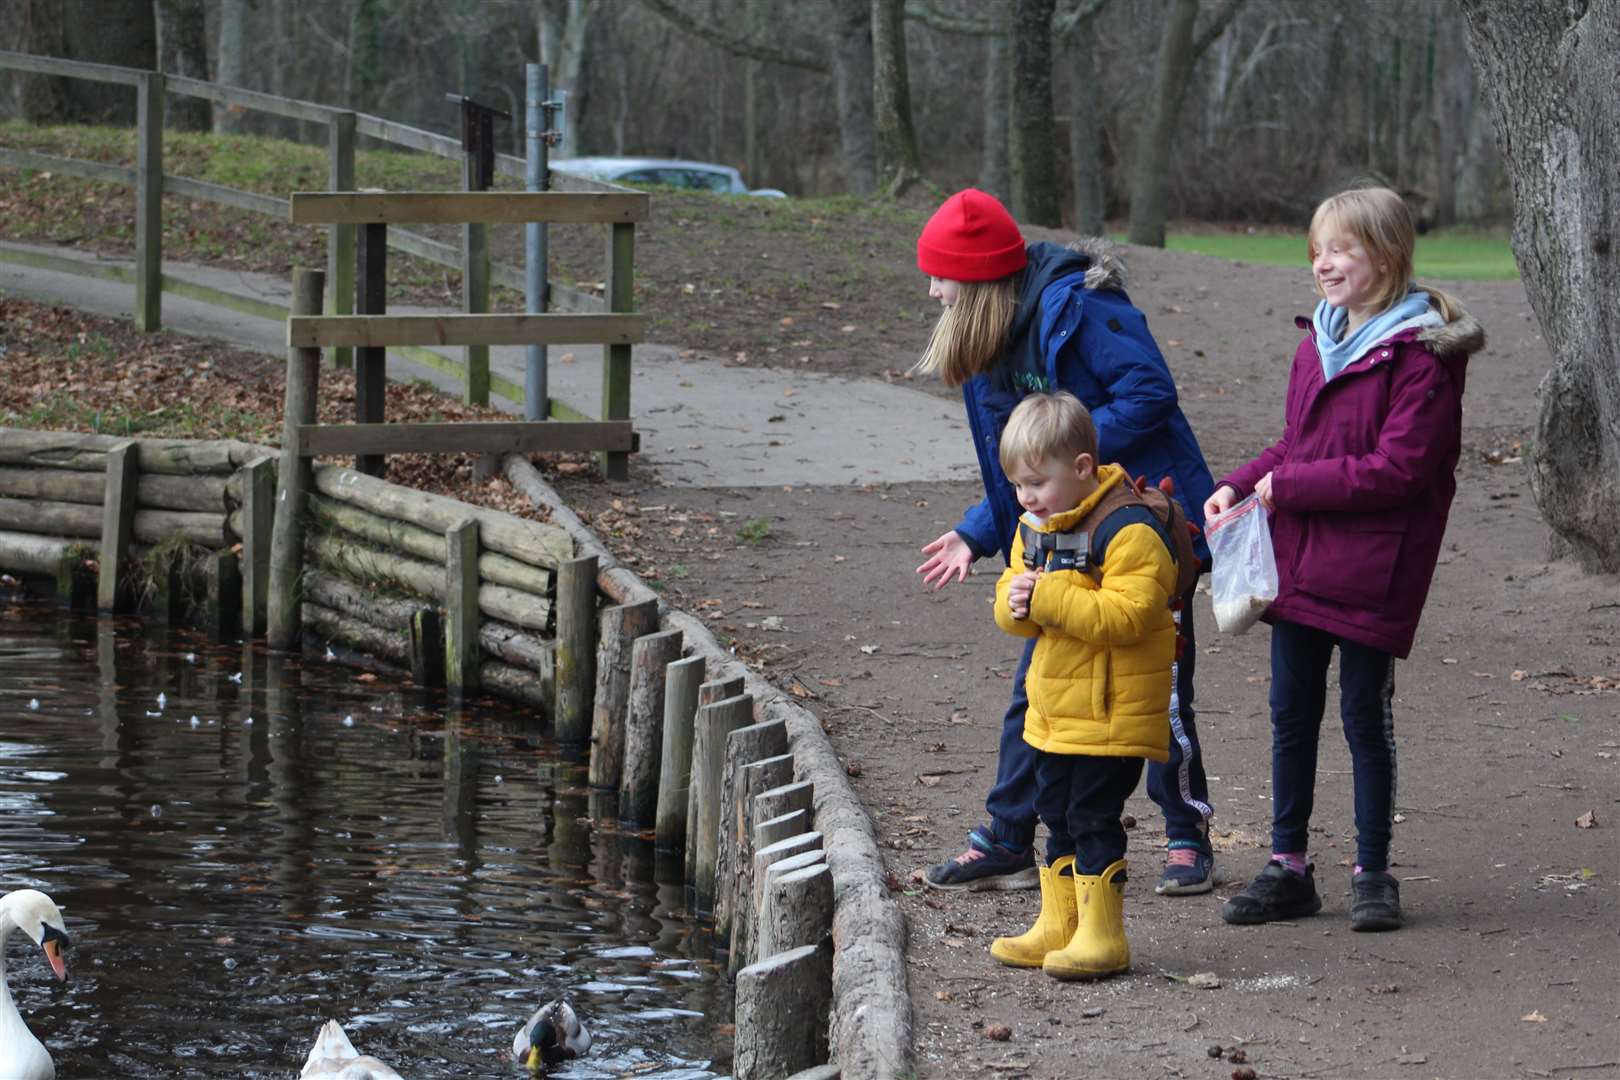 The children enjoy feeding the ducks and swans by the loch.